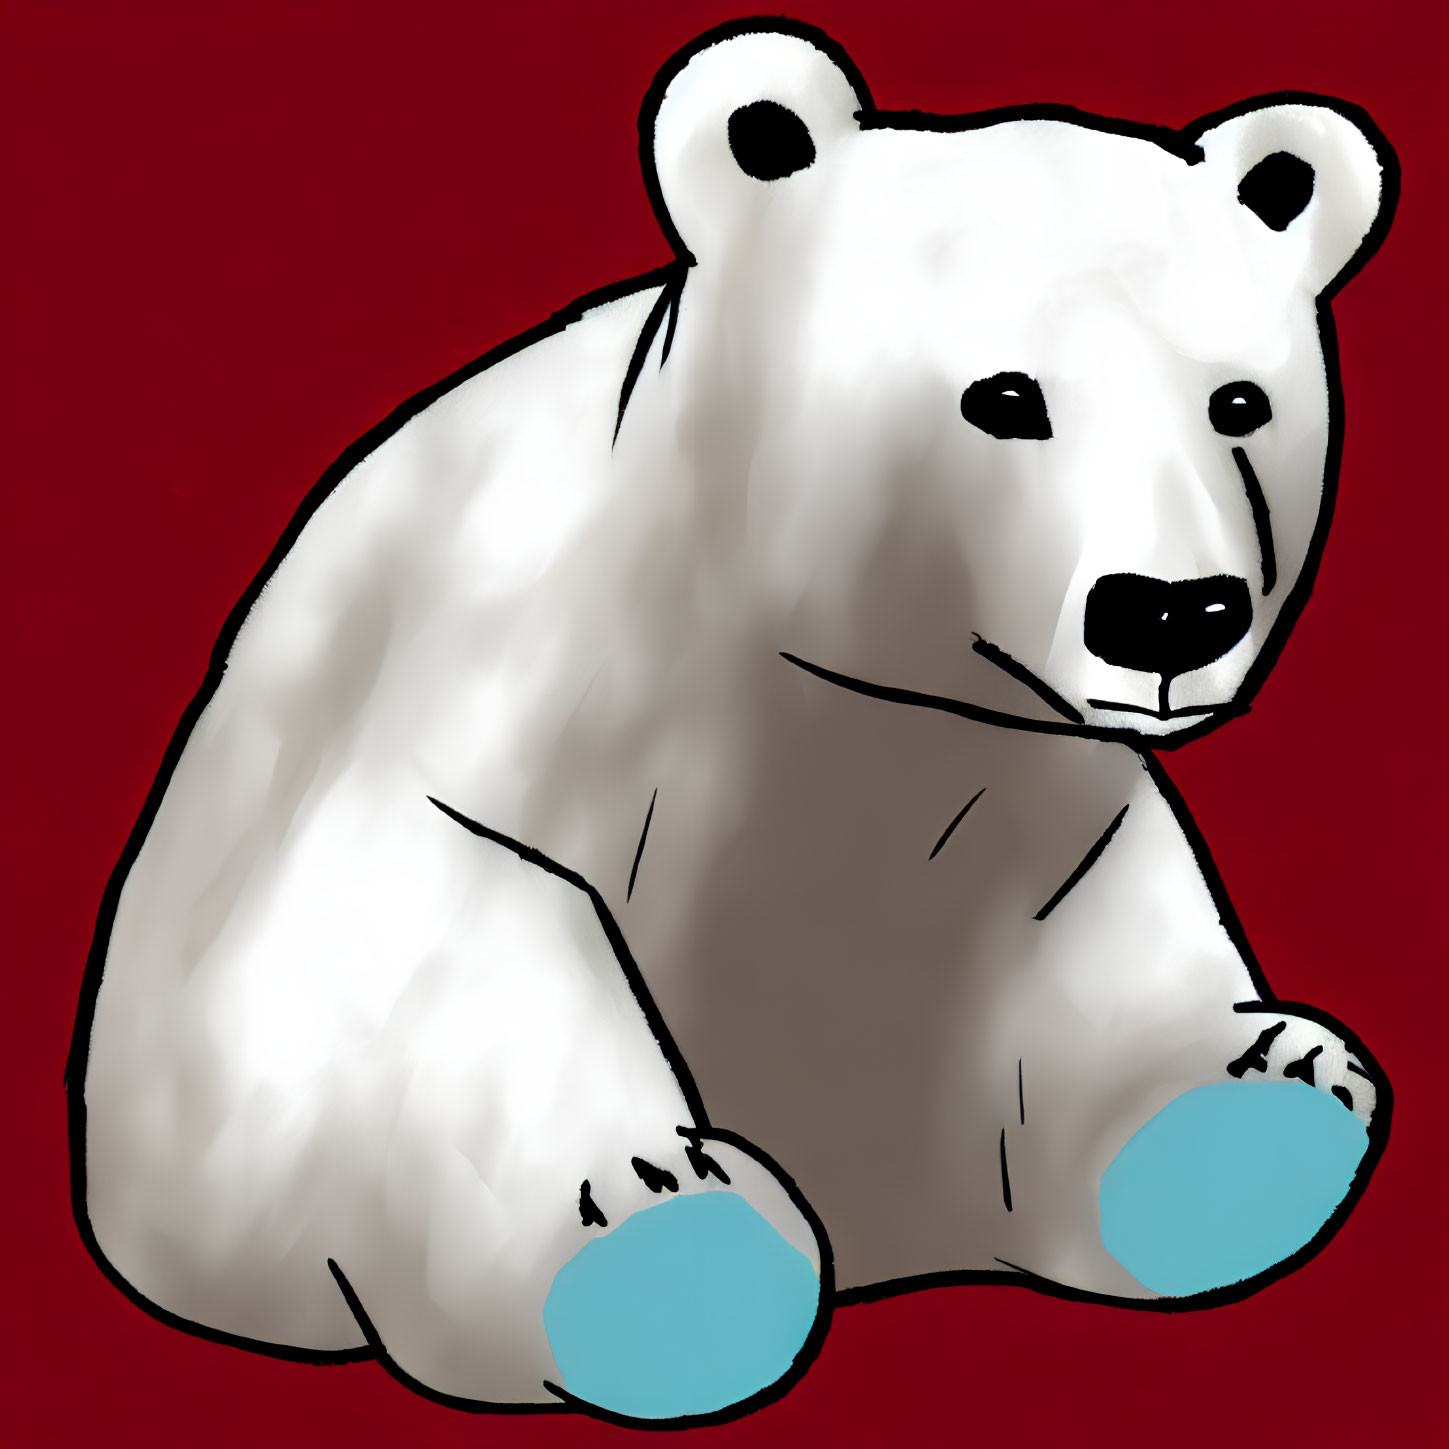 Seated Polar Bear Illustration with White Coat on Red Background